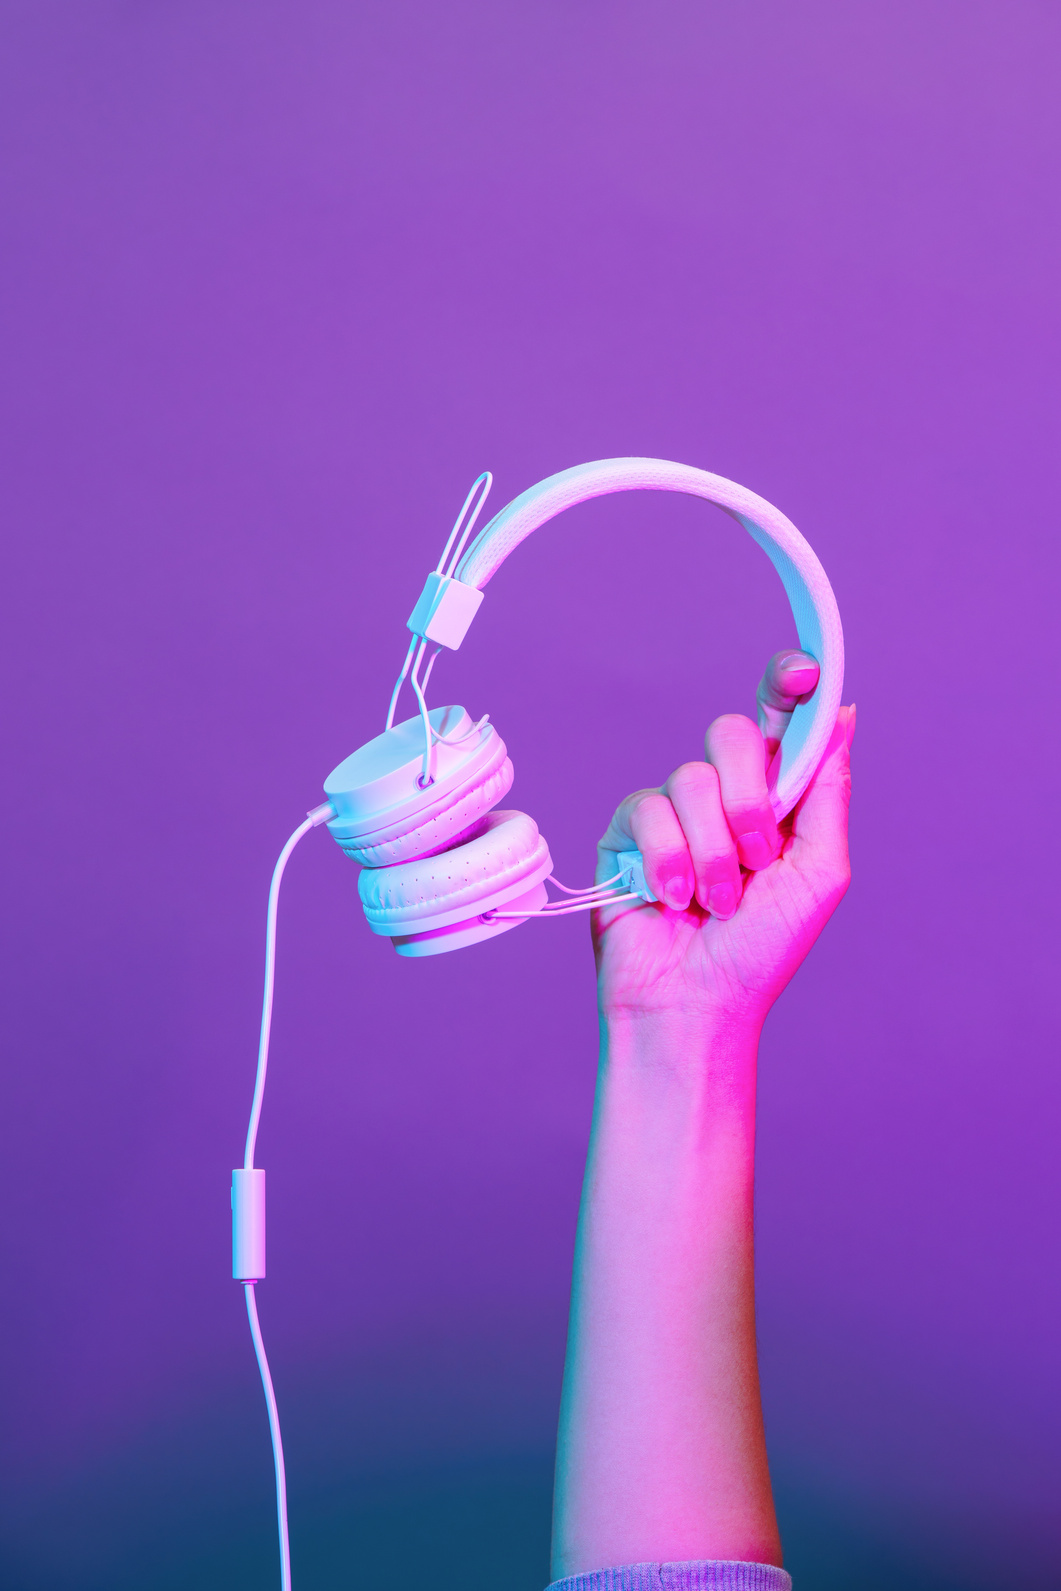 Hands with white headphones on violet background.